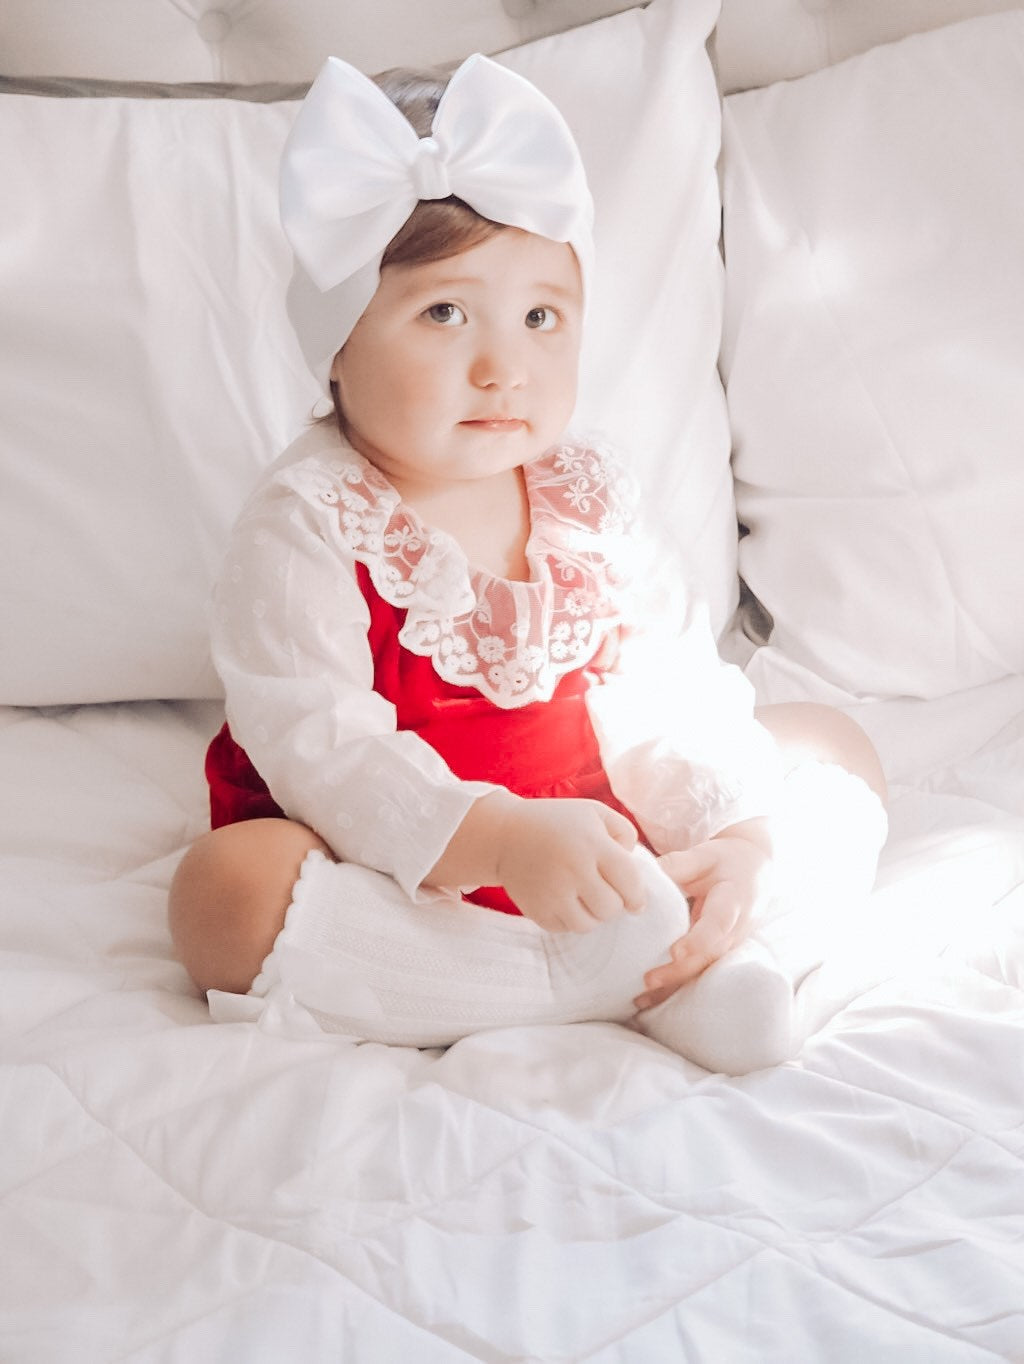 child wearing the Baby Girl Vintage Lace Red Velvet - White Sleeves Romper. Also has white boy headband on head, and white knee high socks.